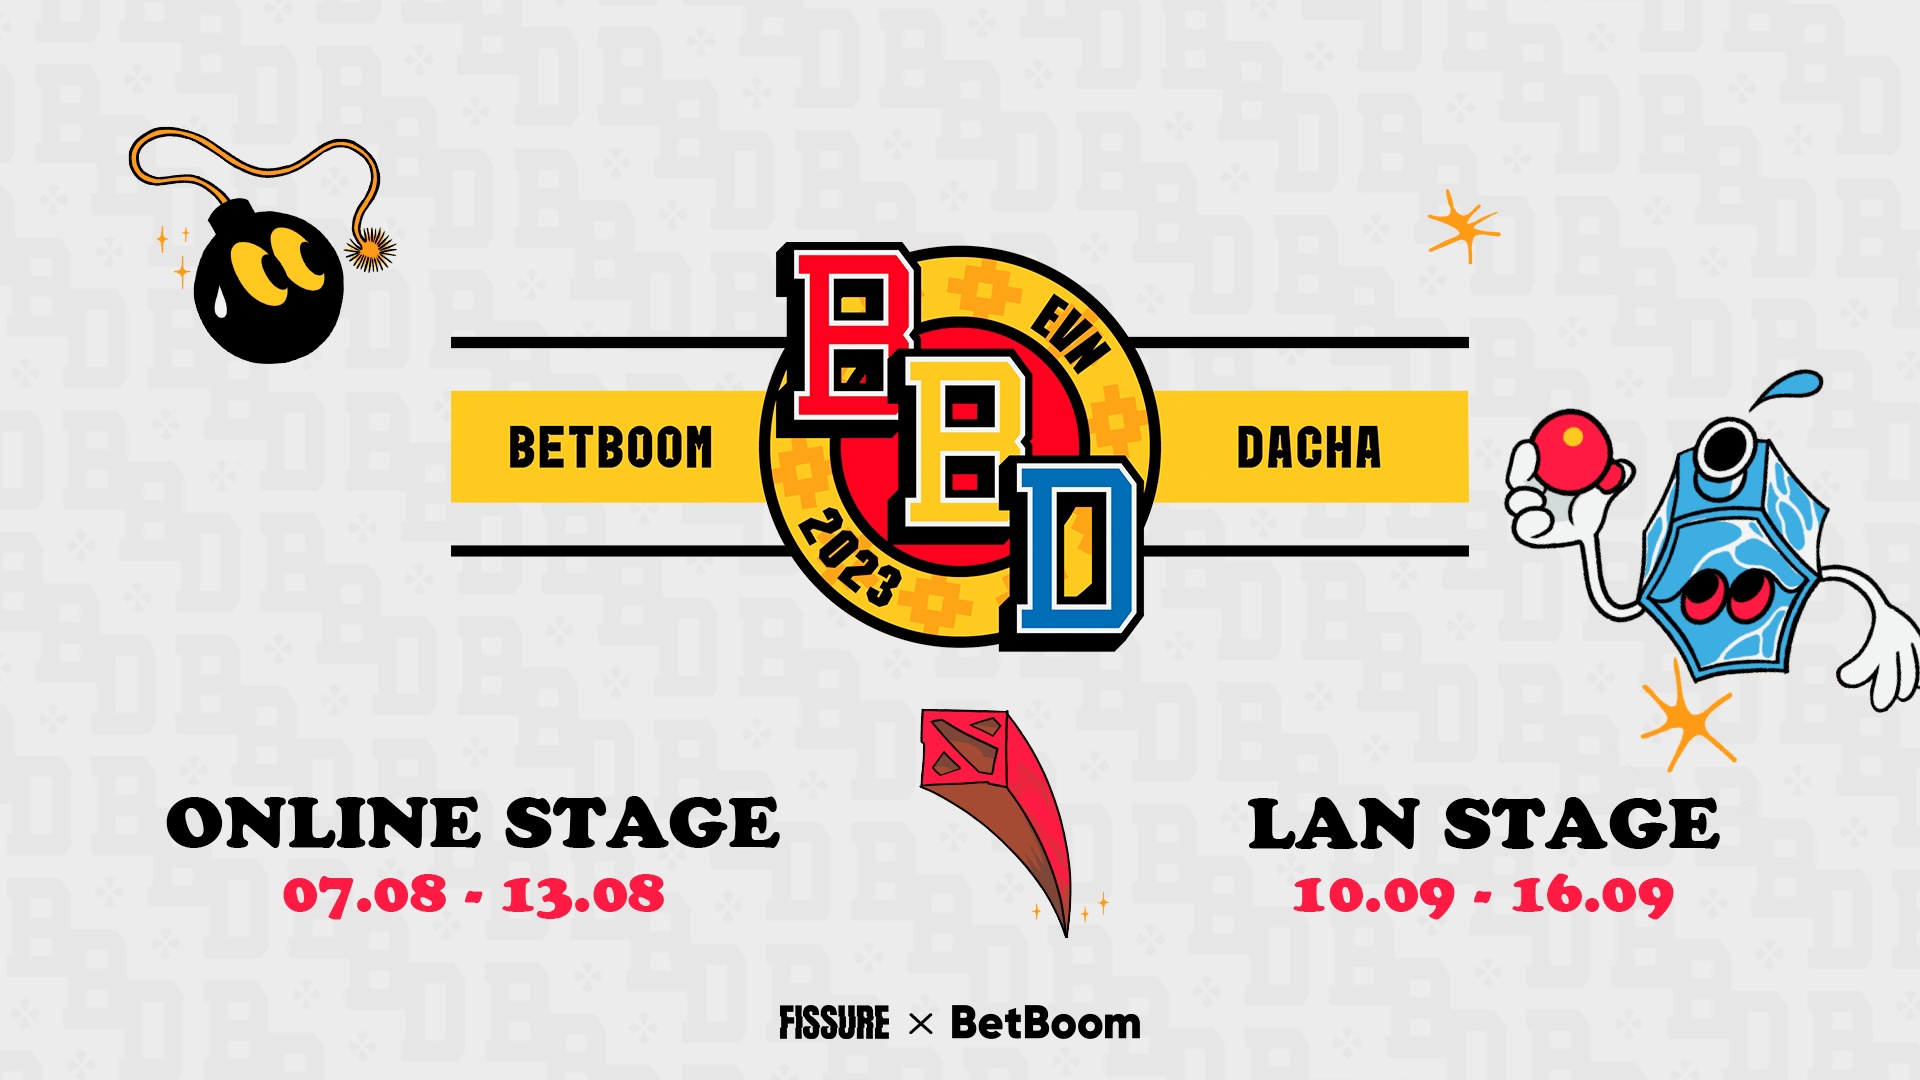 BetBoom launches laid-back $250,000 Dota 2 LAN event